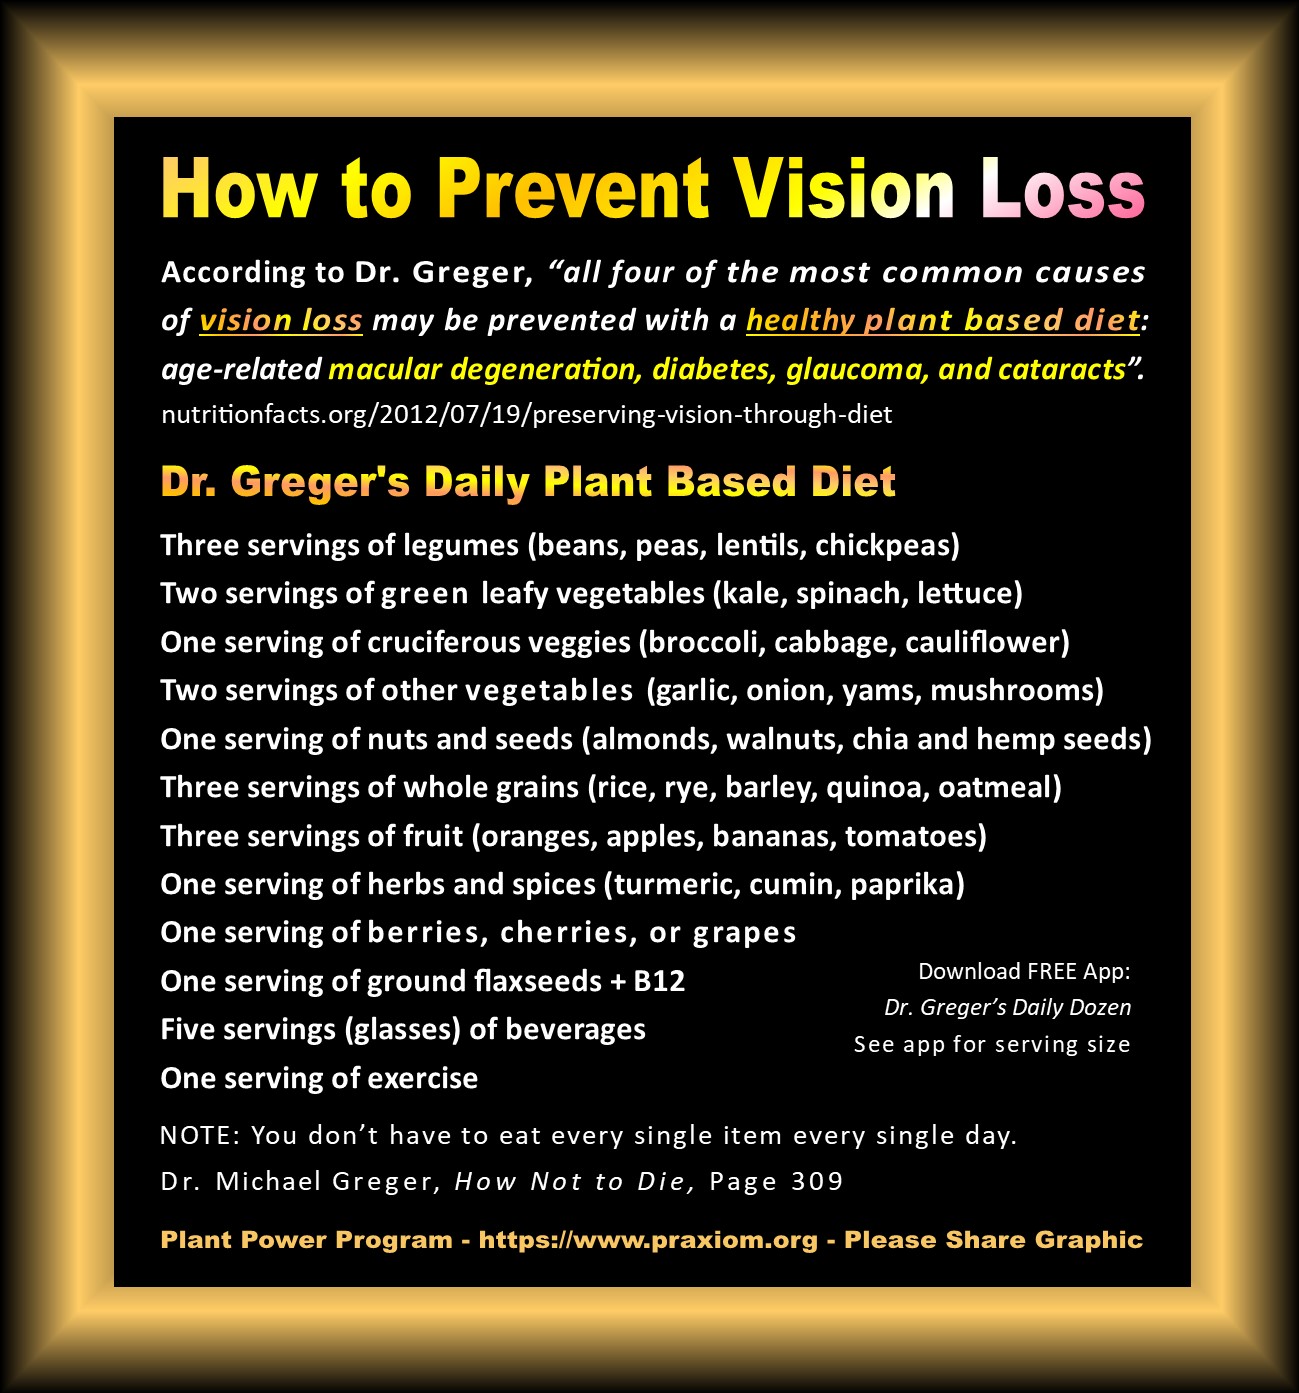 How to Prevent Vision Loss - Dr. Michael Greger